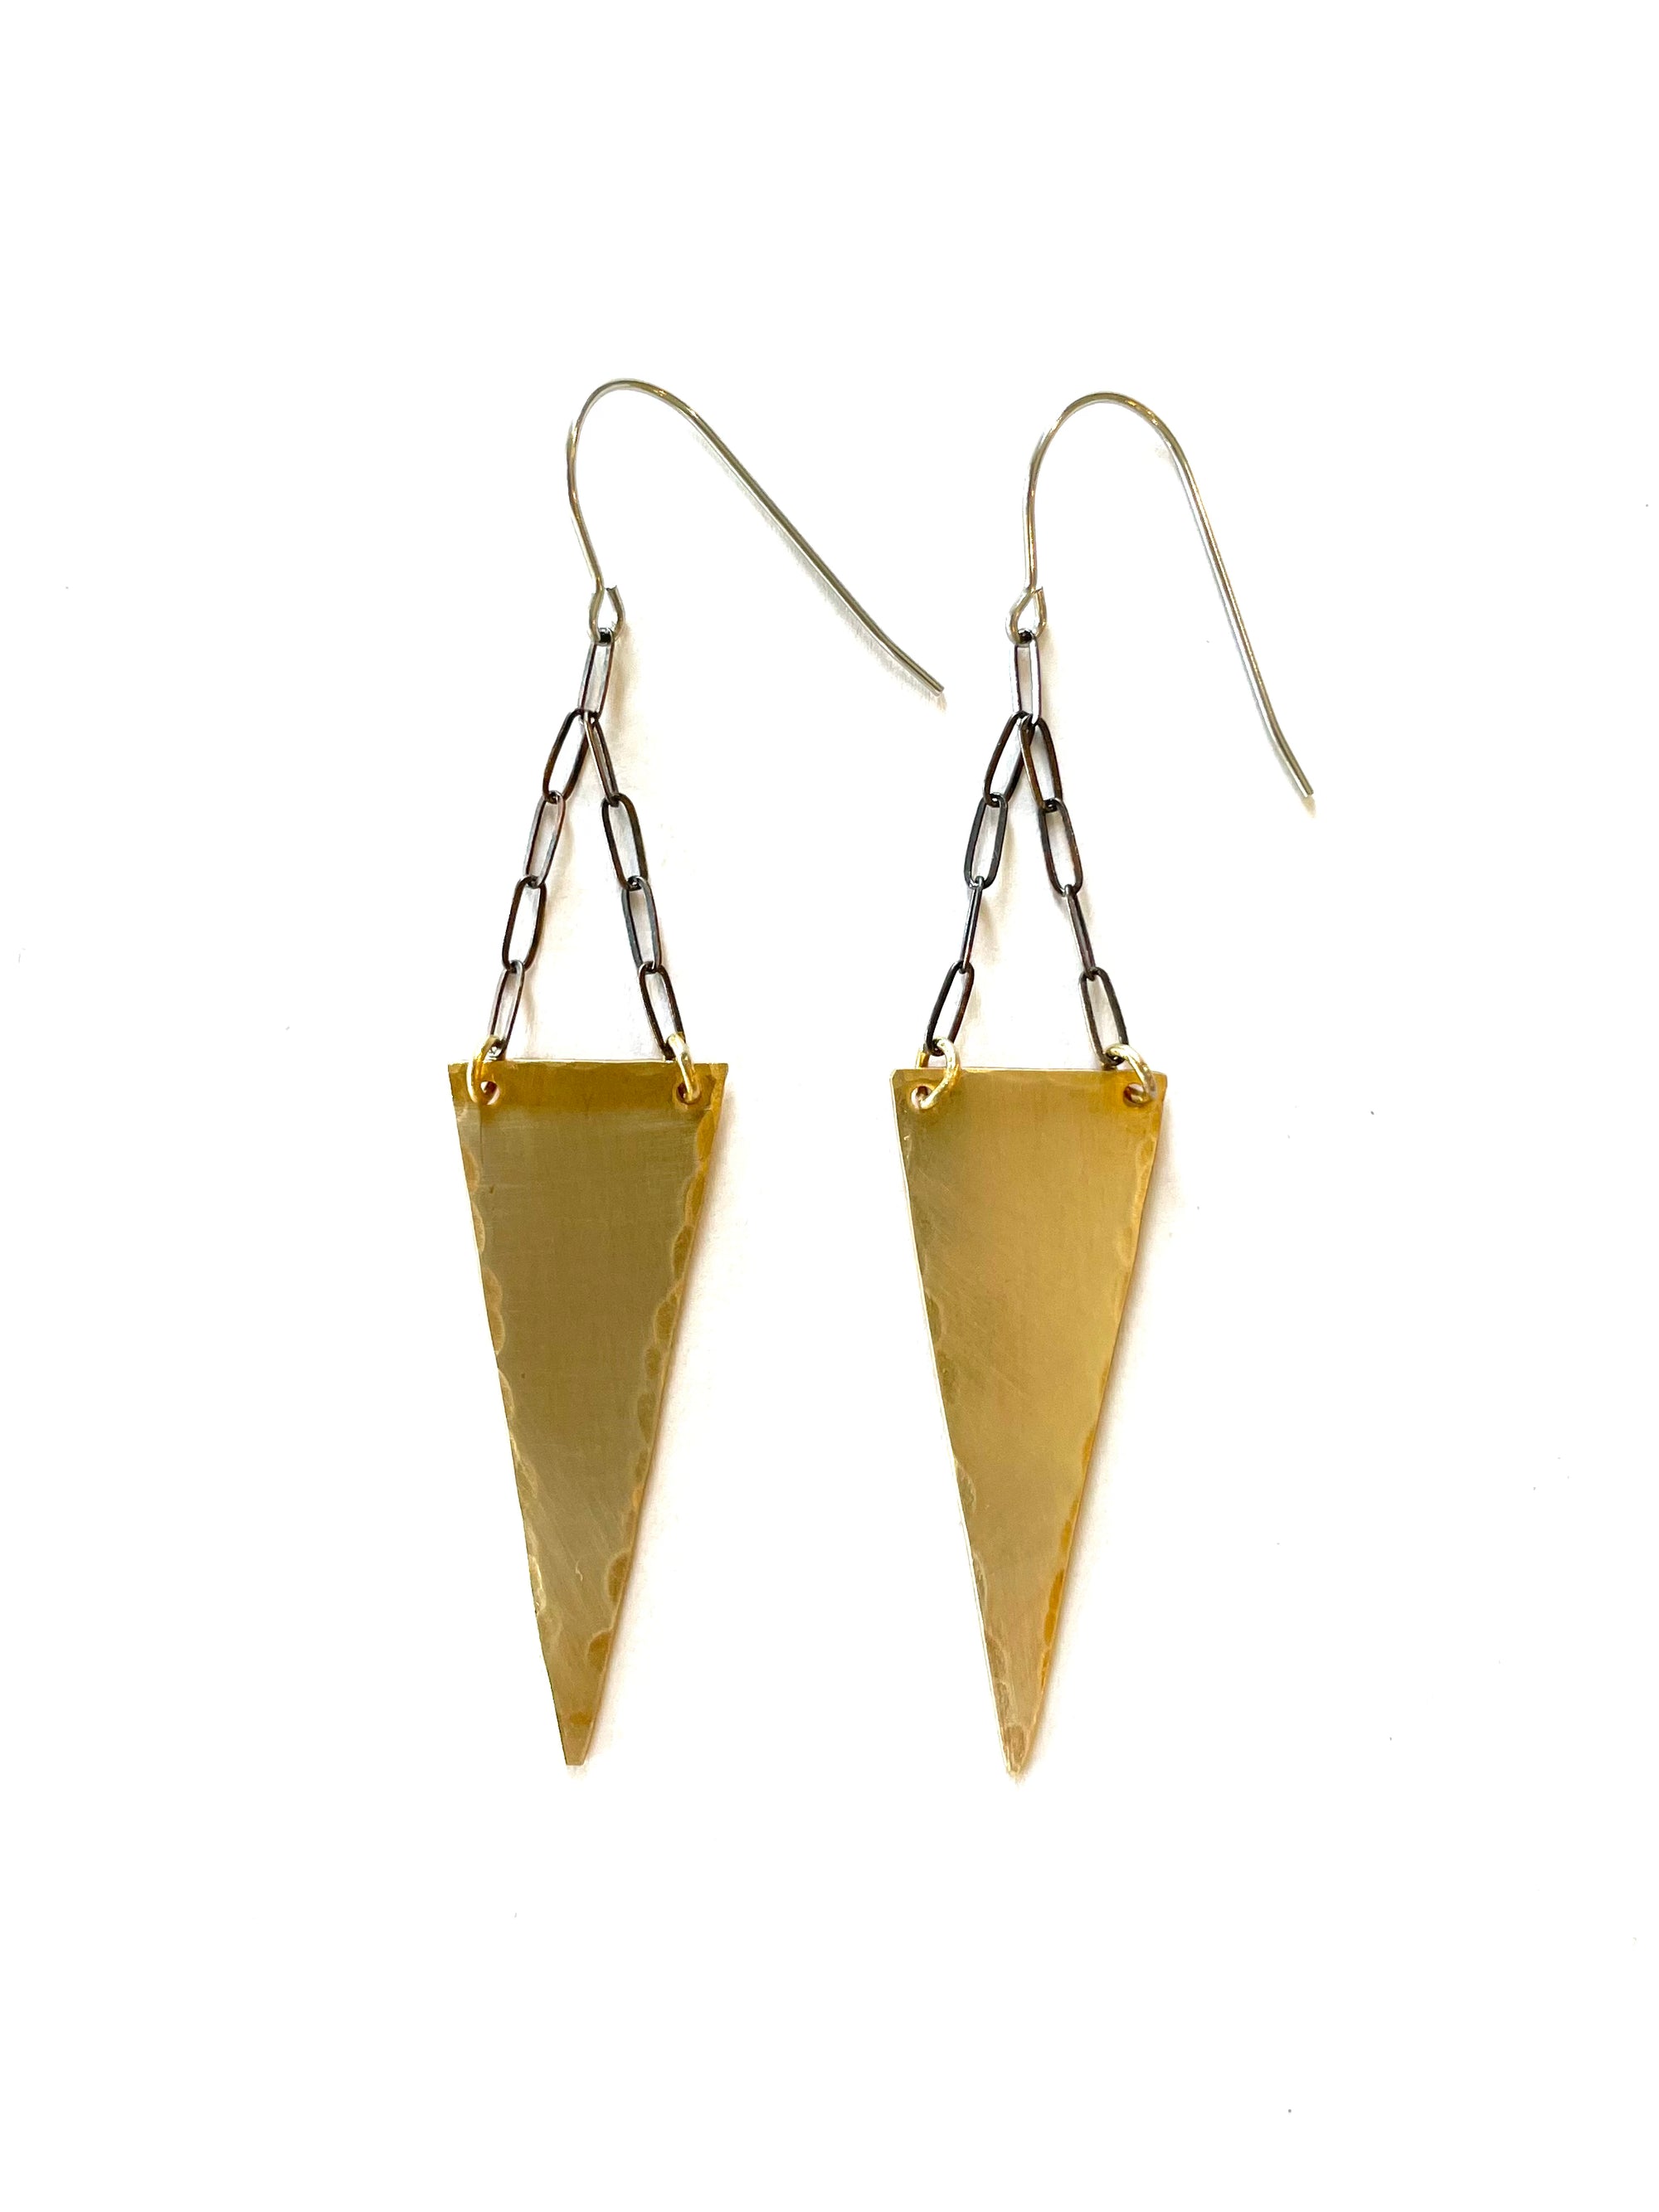 Solid Long Triangle and Chain Earrings